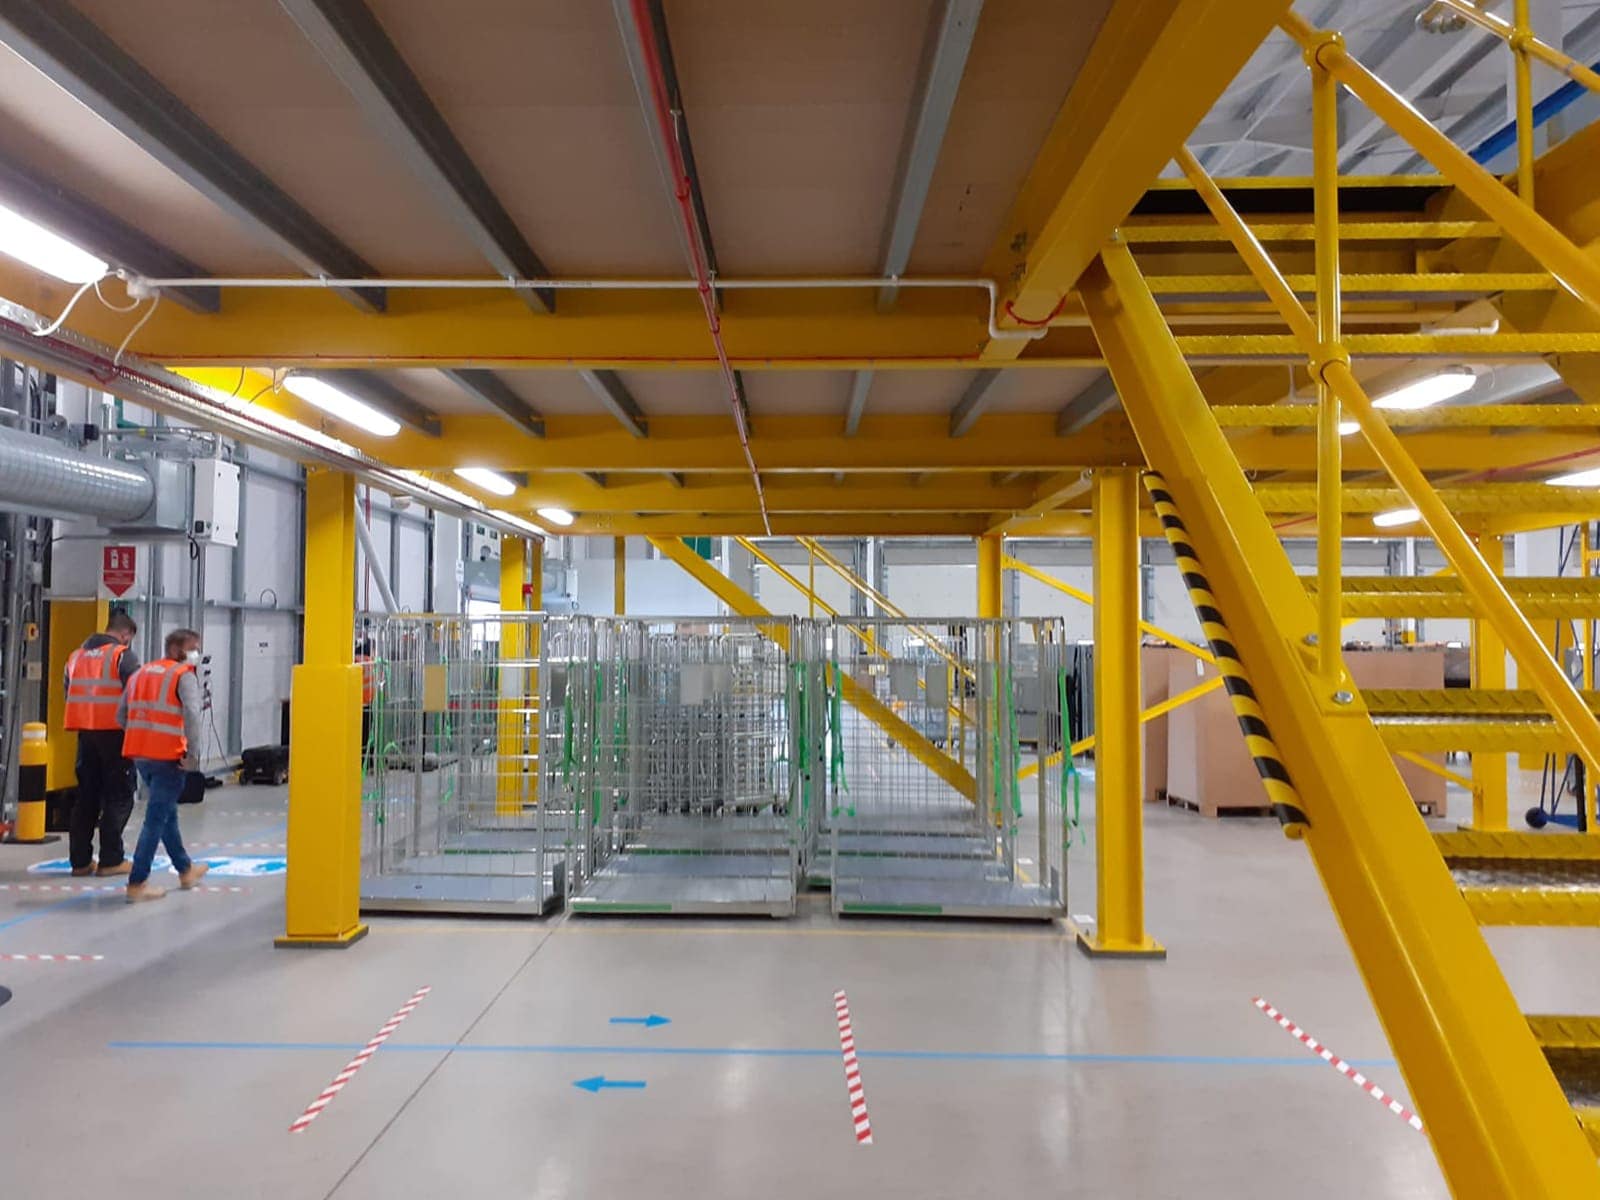 What are the benefits of a mezzanine floor?